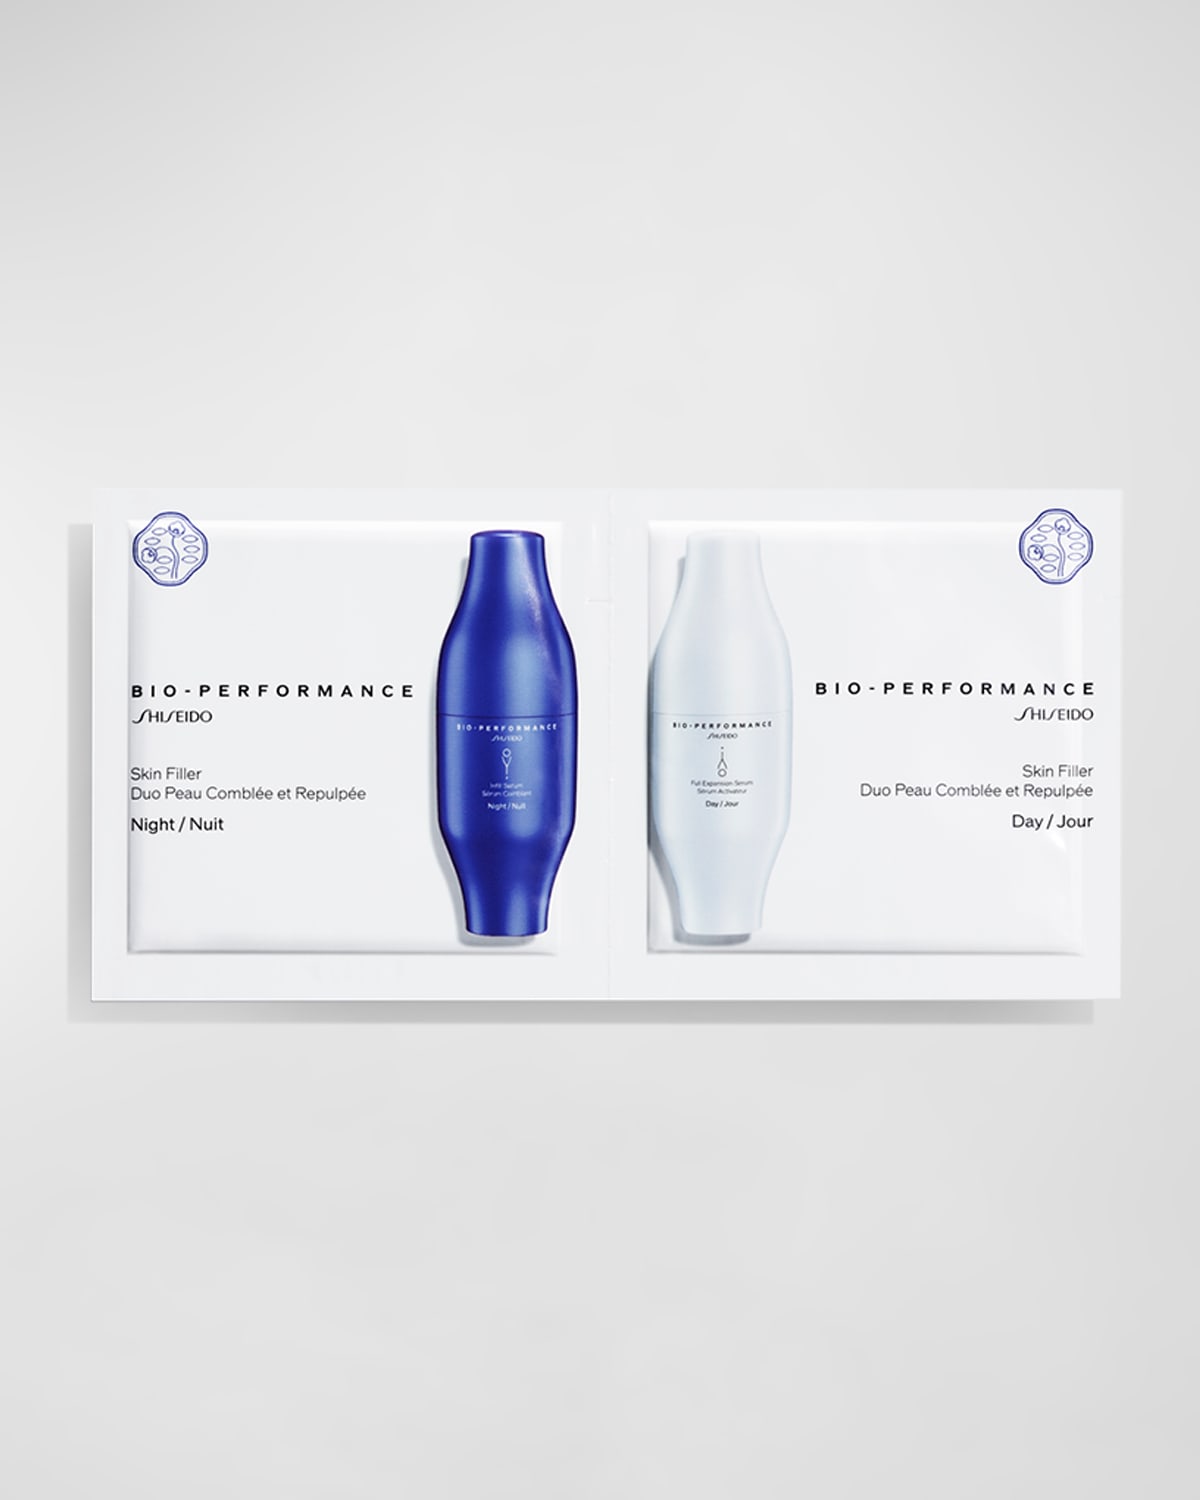 Bio-Performance Skin Filler Serum Set, Yours with any $125 Shiseido Order